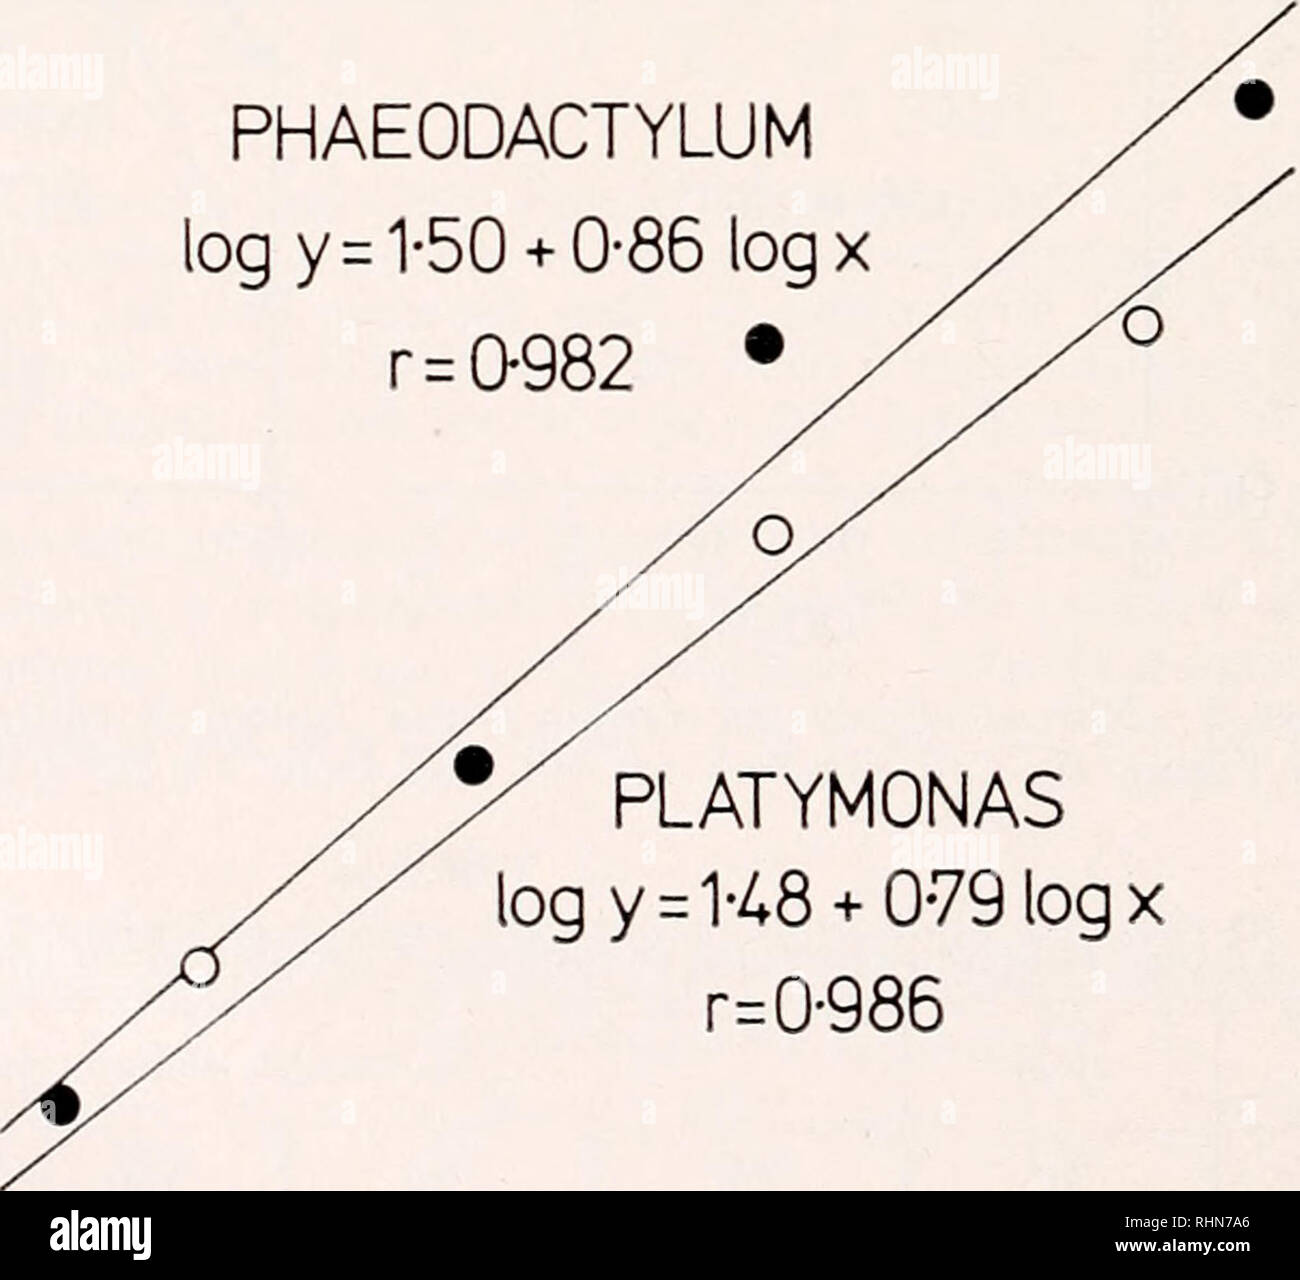 . The Biological bulletin. Biology; Zoology; Biology; Marine Biology. 0 1 234 days FIGURE 3. Platyinoiuis siihconlifonnis and Phaeodactylum triconnituni : lead budget in percent of initial addition (0.3 mg Pb/1) as a function of time. S indicates soluble lead; P, &quot;particulate&quot; lead, I'.r. lead associated with the algae; and P + S, sum of soluble and &quot;particu- late&quot; lead. 2000- 1000- (D S&gt; 500 o ^ 200 100 PHAEODACTYLUM log y = 1-50+ 0-86 log x. PLATYMONAS log y = H8+ 0-79 log x r^ 0-986 -r-O 0-005 0-01 0-02 0-05 0-1 soluble lead in medium (mg/l) 0-2 4. PIiitynwiHis siit'C Stock Photo